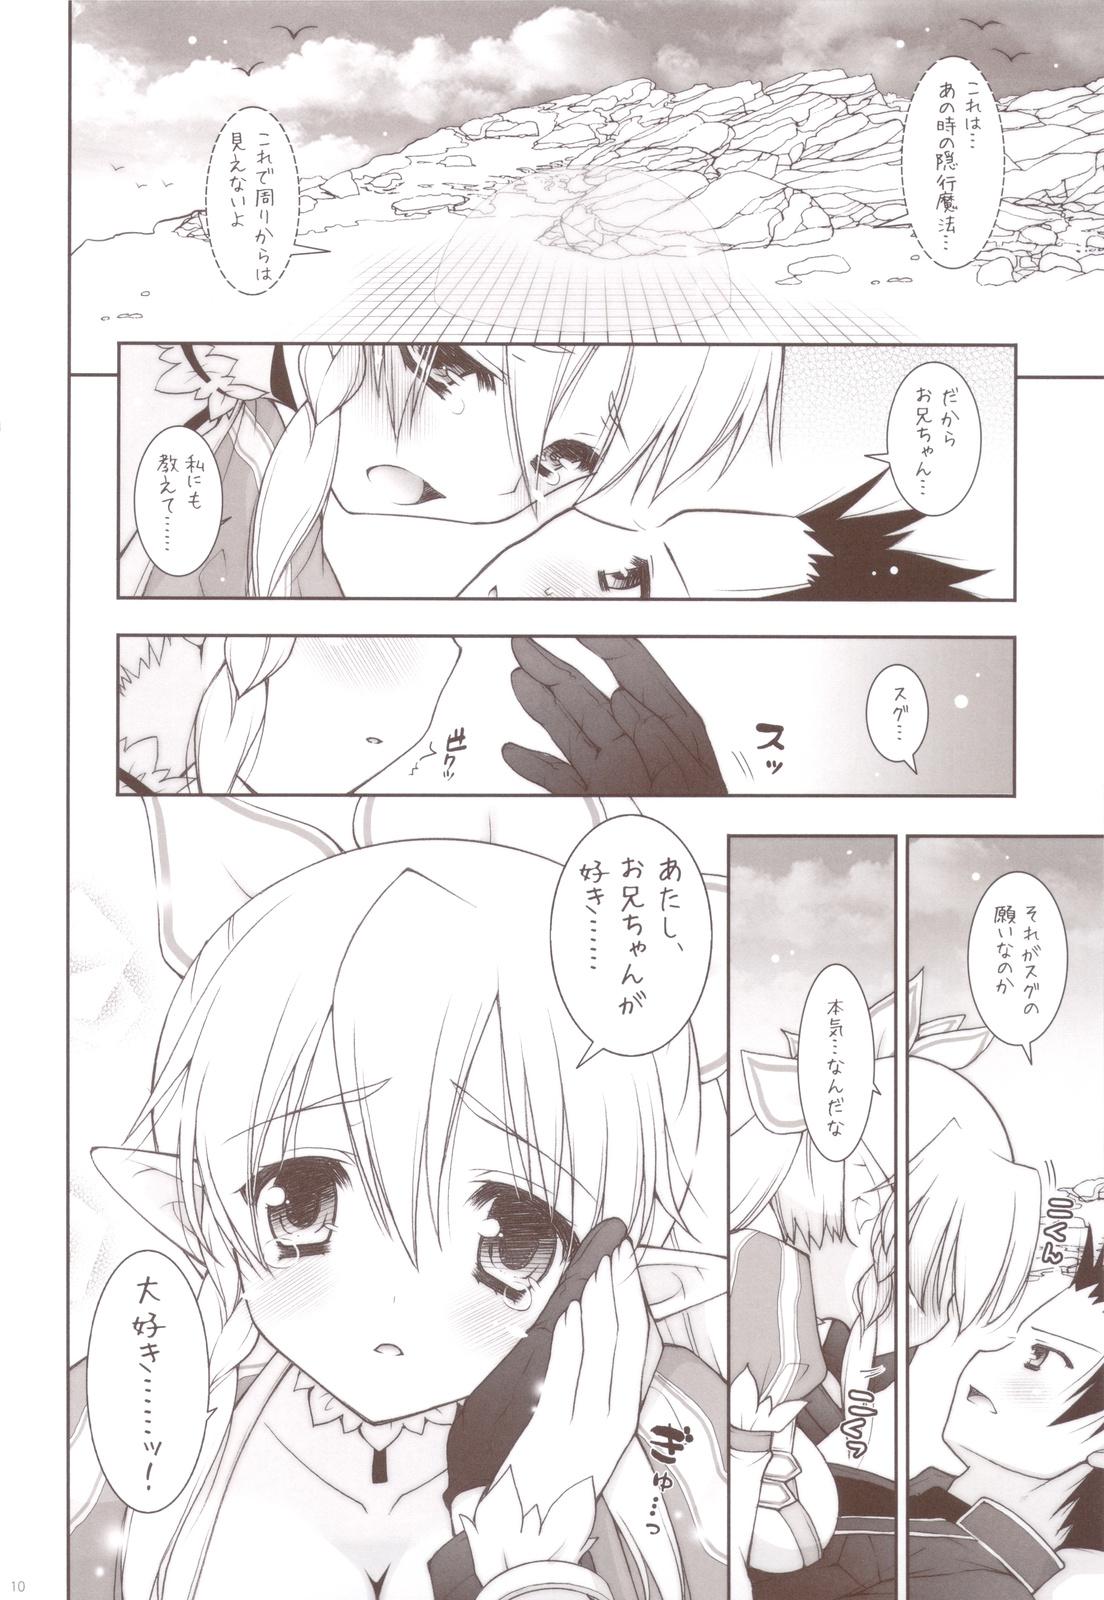 Cocksucking Sex And Oppai + Omake Bon - Sword art online Rico - Page 9